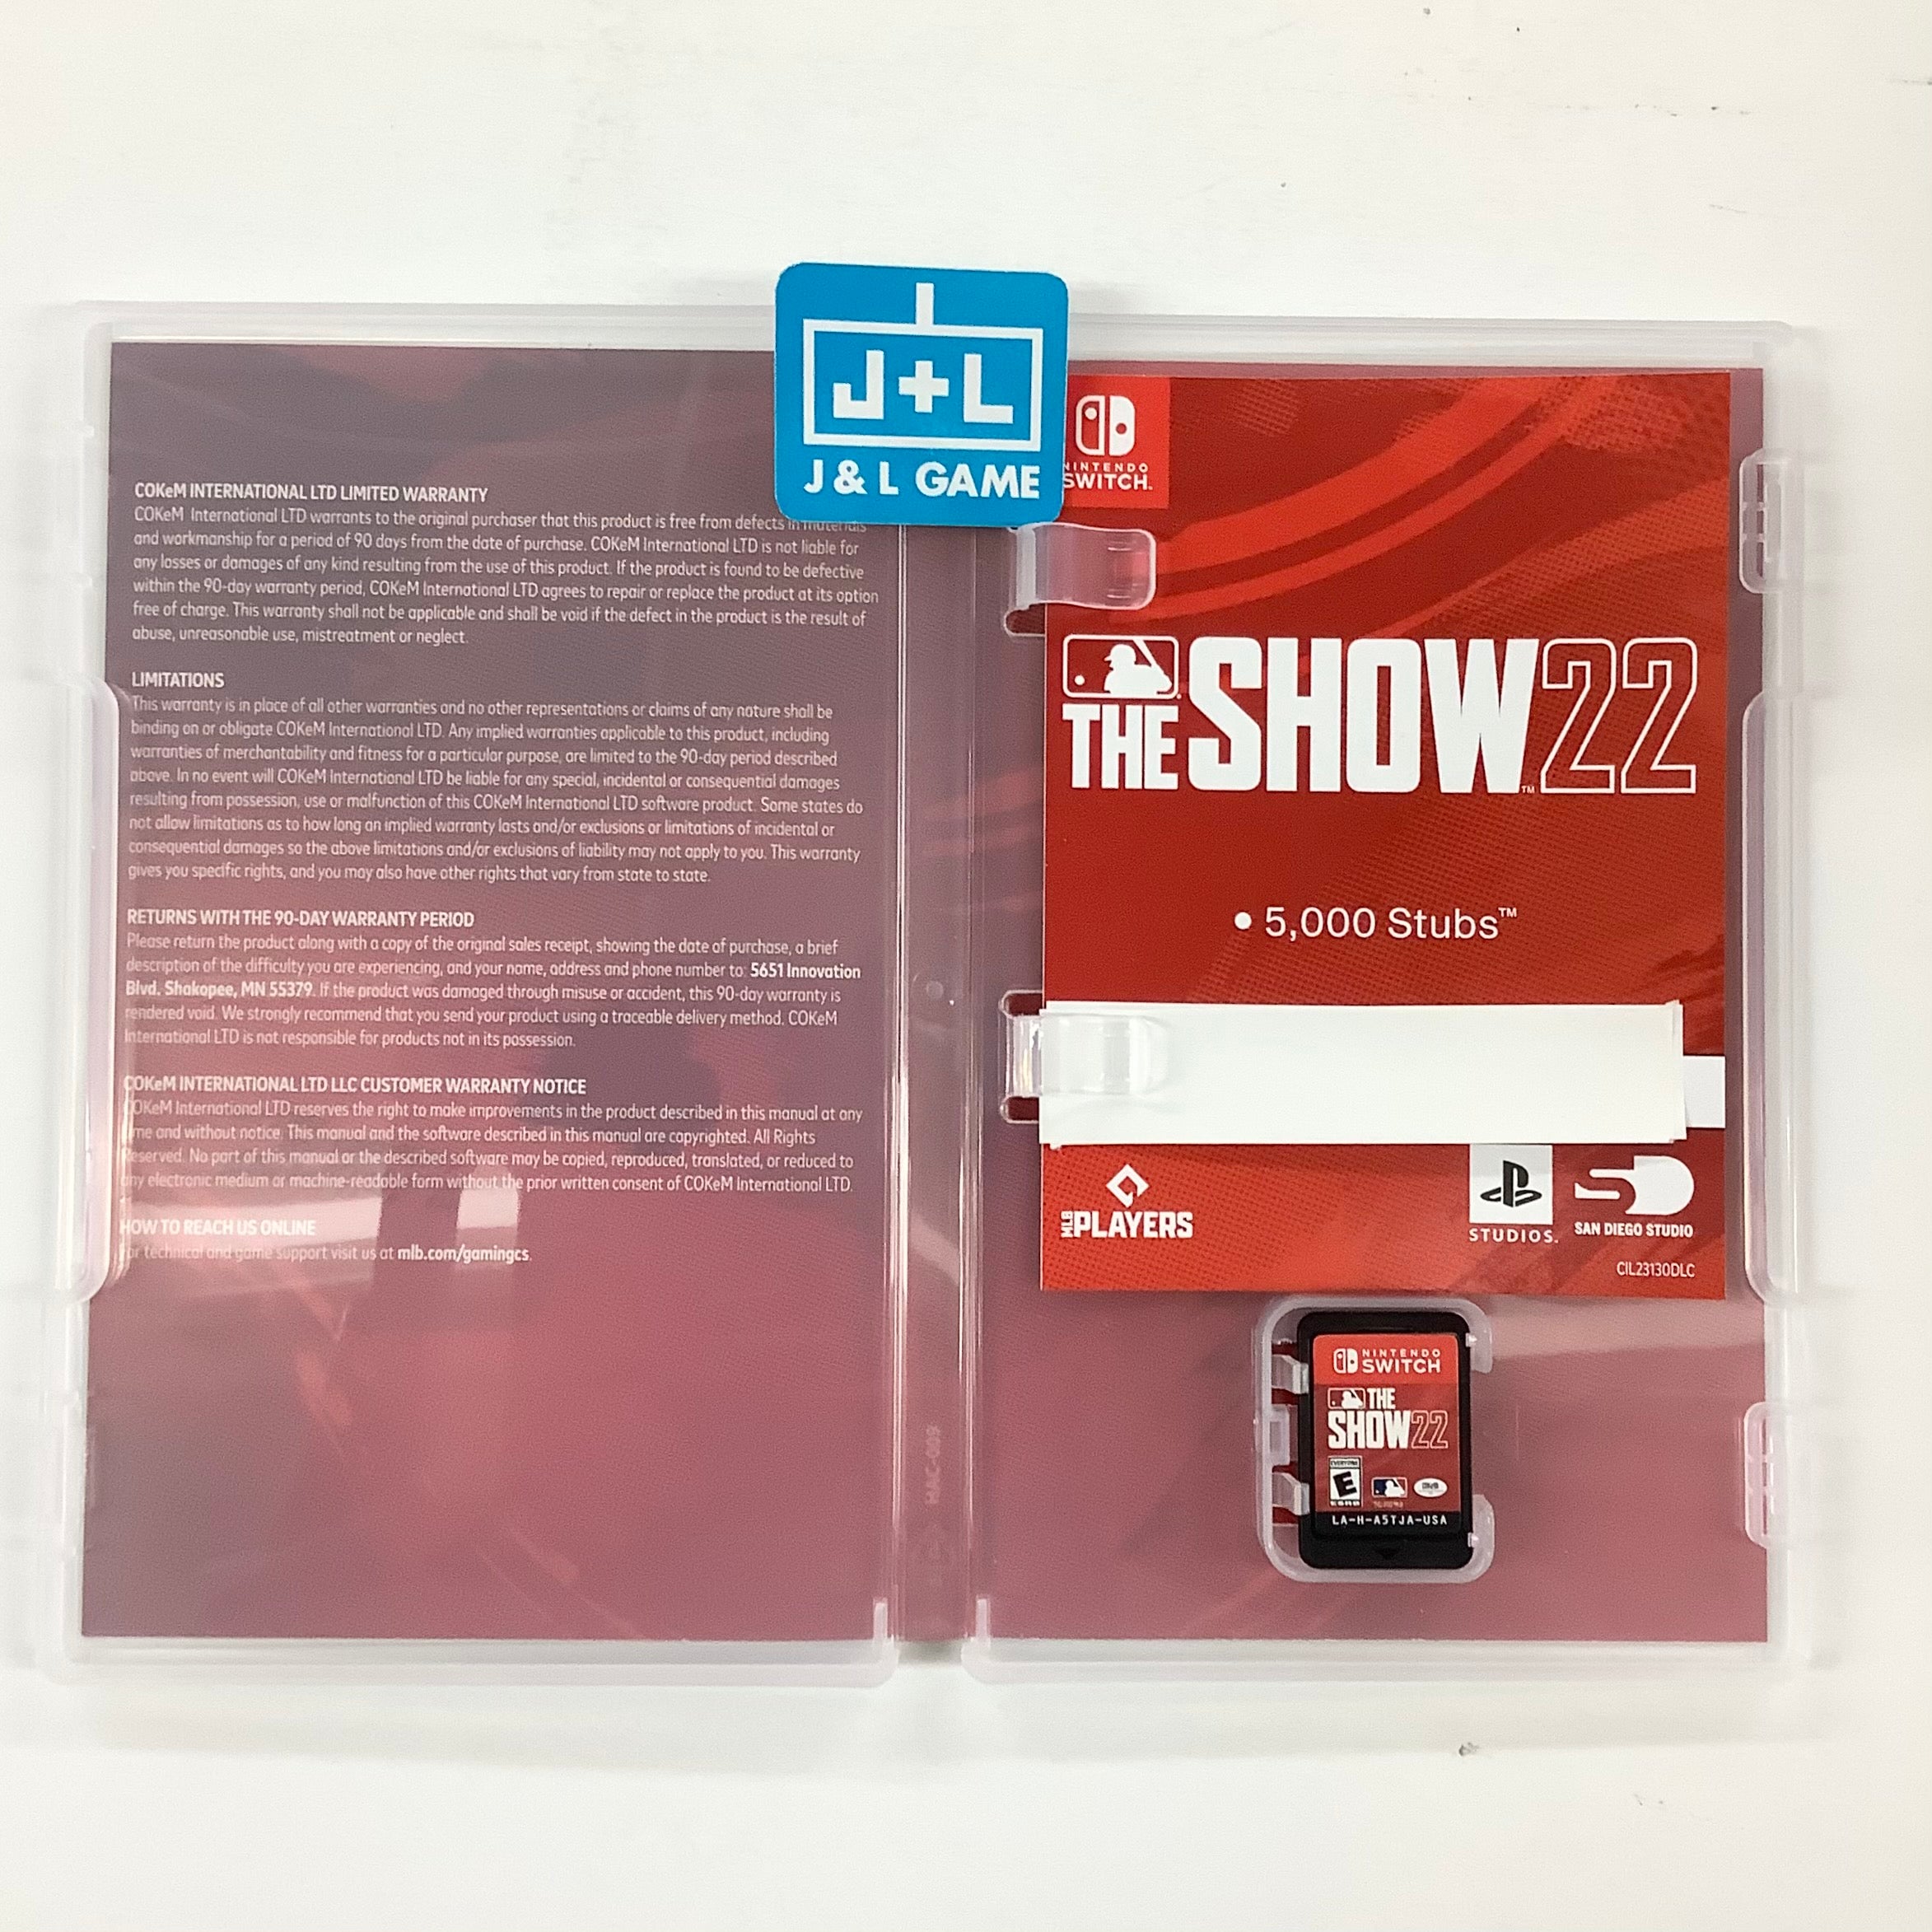 MLB The Show 22 - (NSW) Nintendo Switch [UNBOXING] Video Games MLB AM   